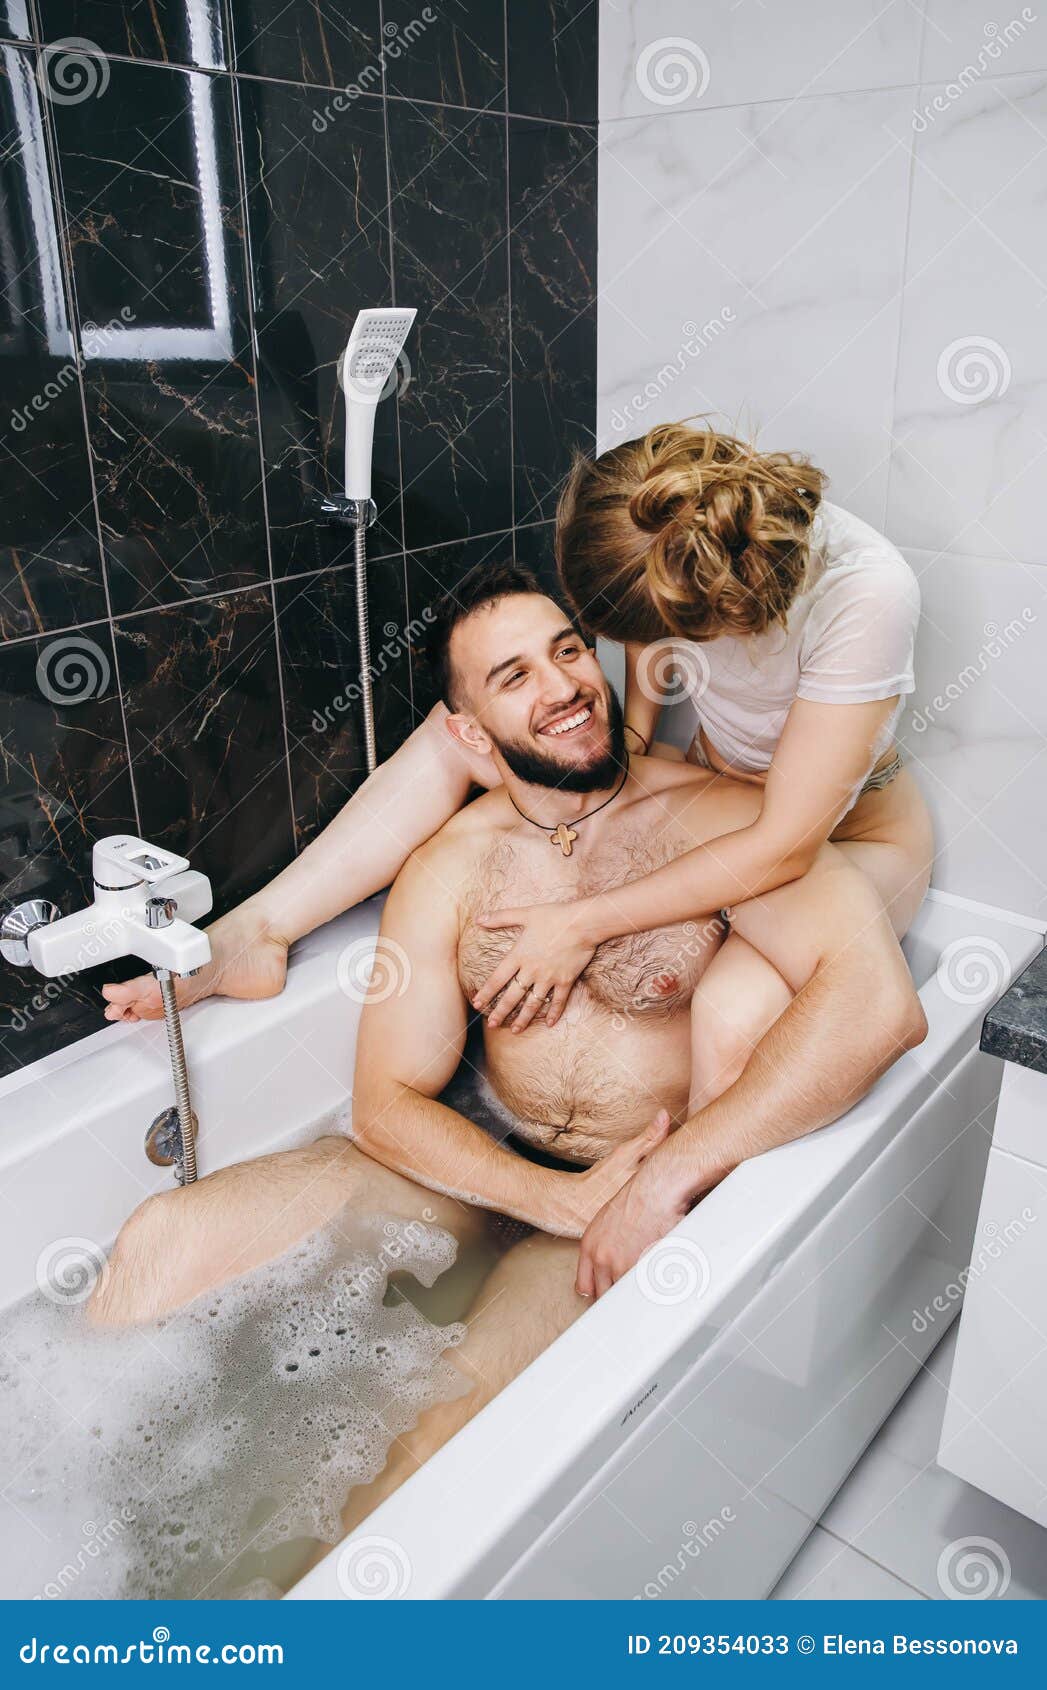 Nude couples sex picture